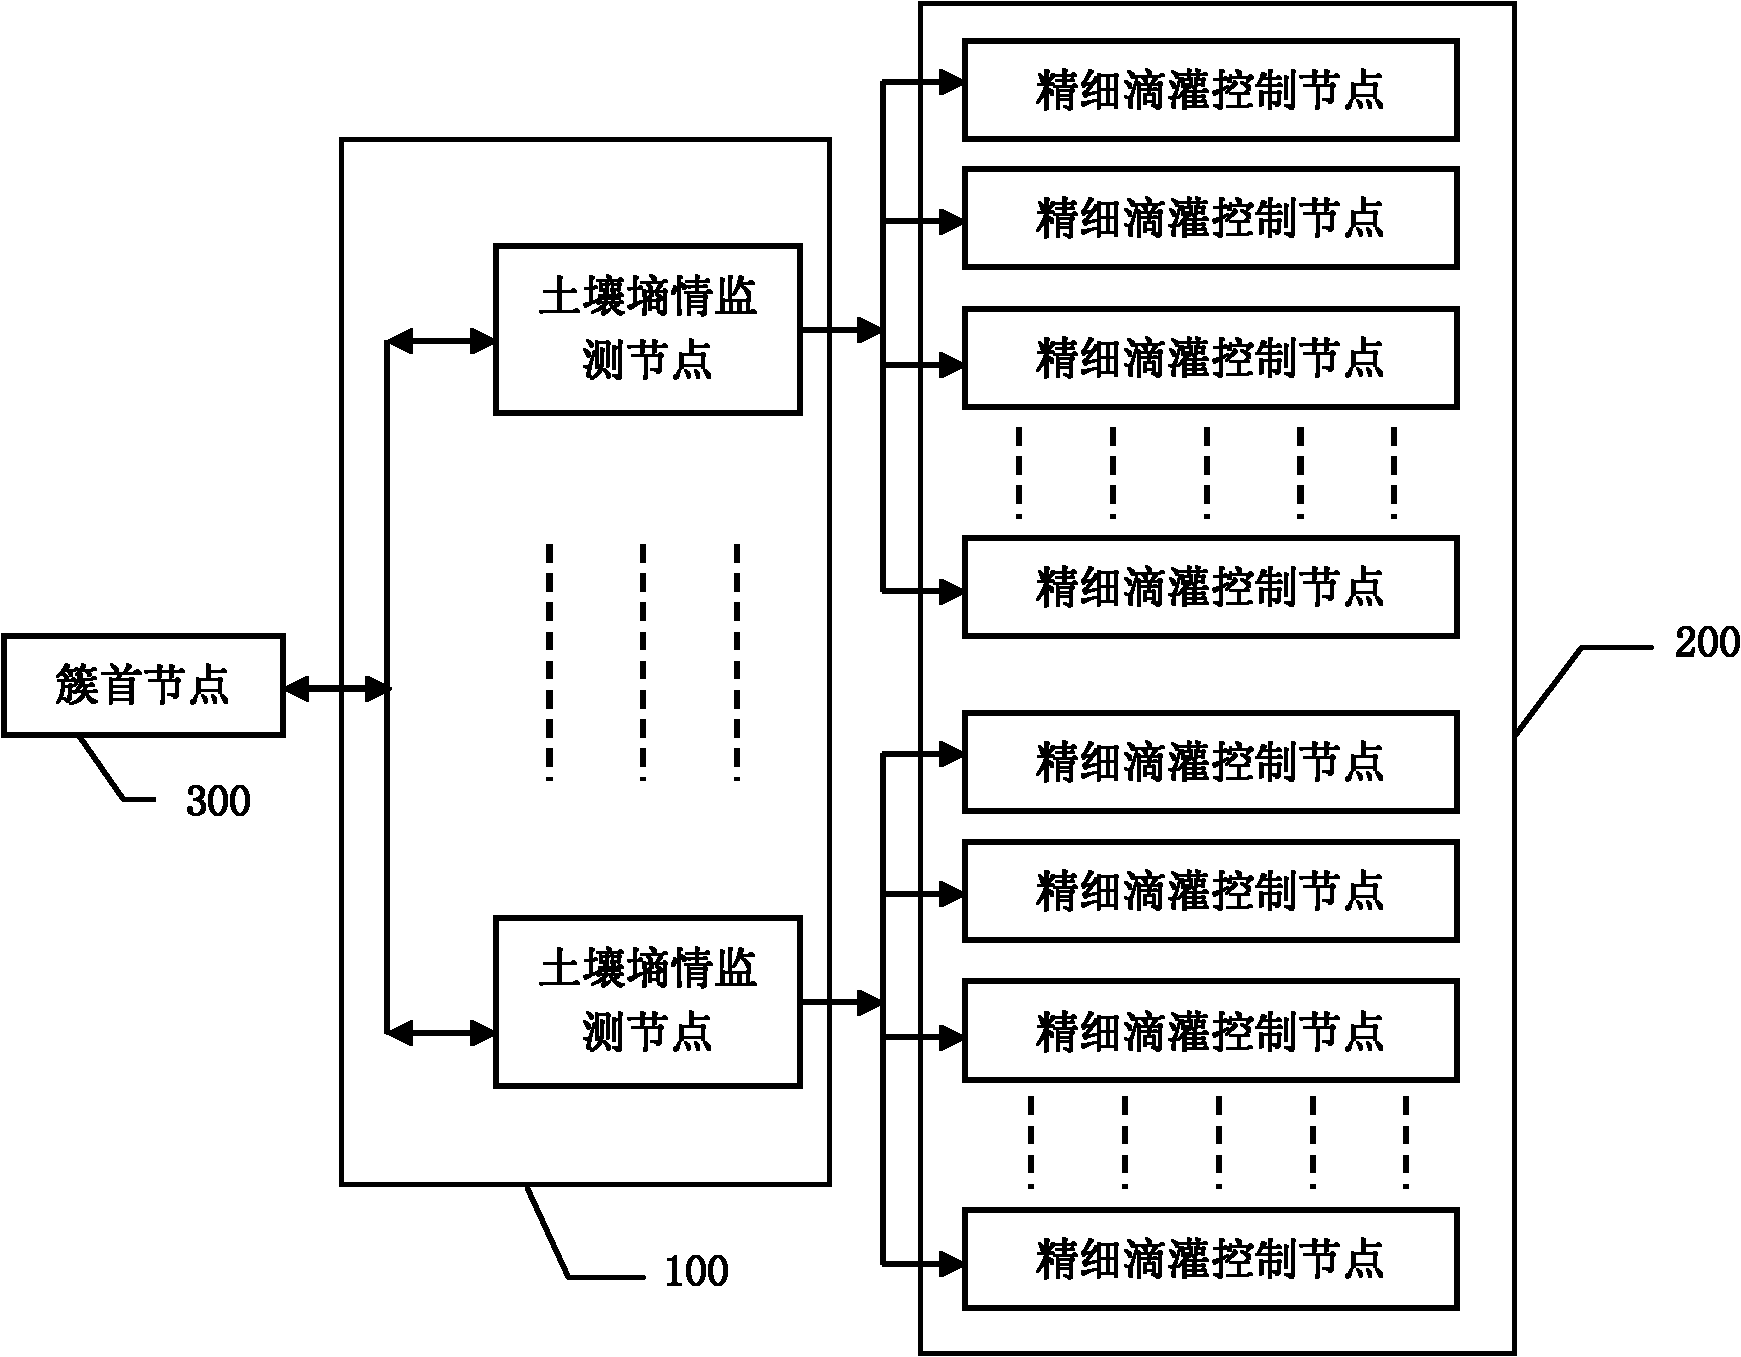 Precision drip irrigation measuring and controlling system based on wireless sensor network